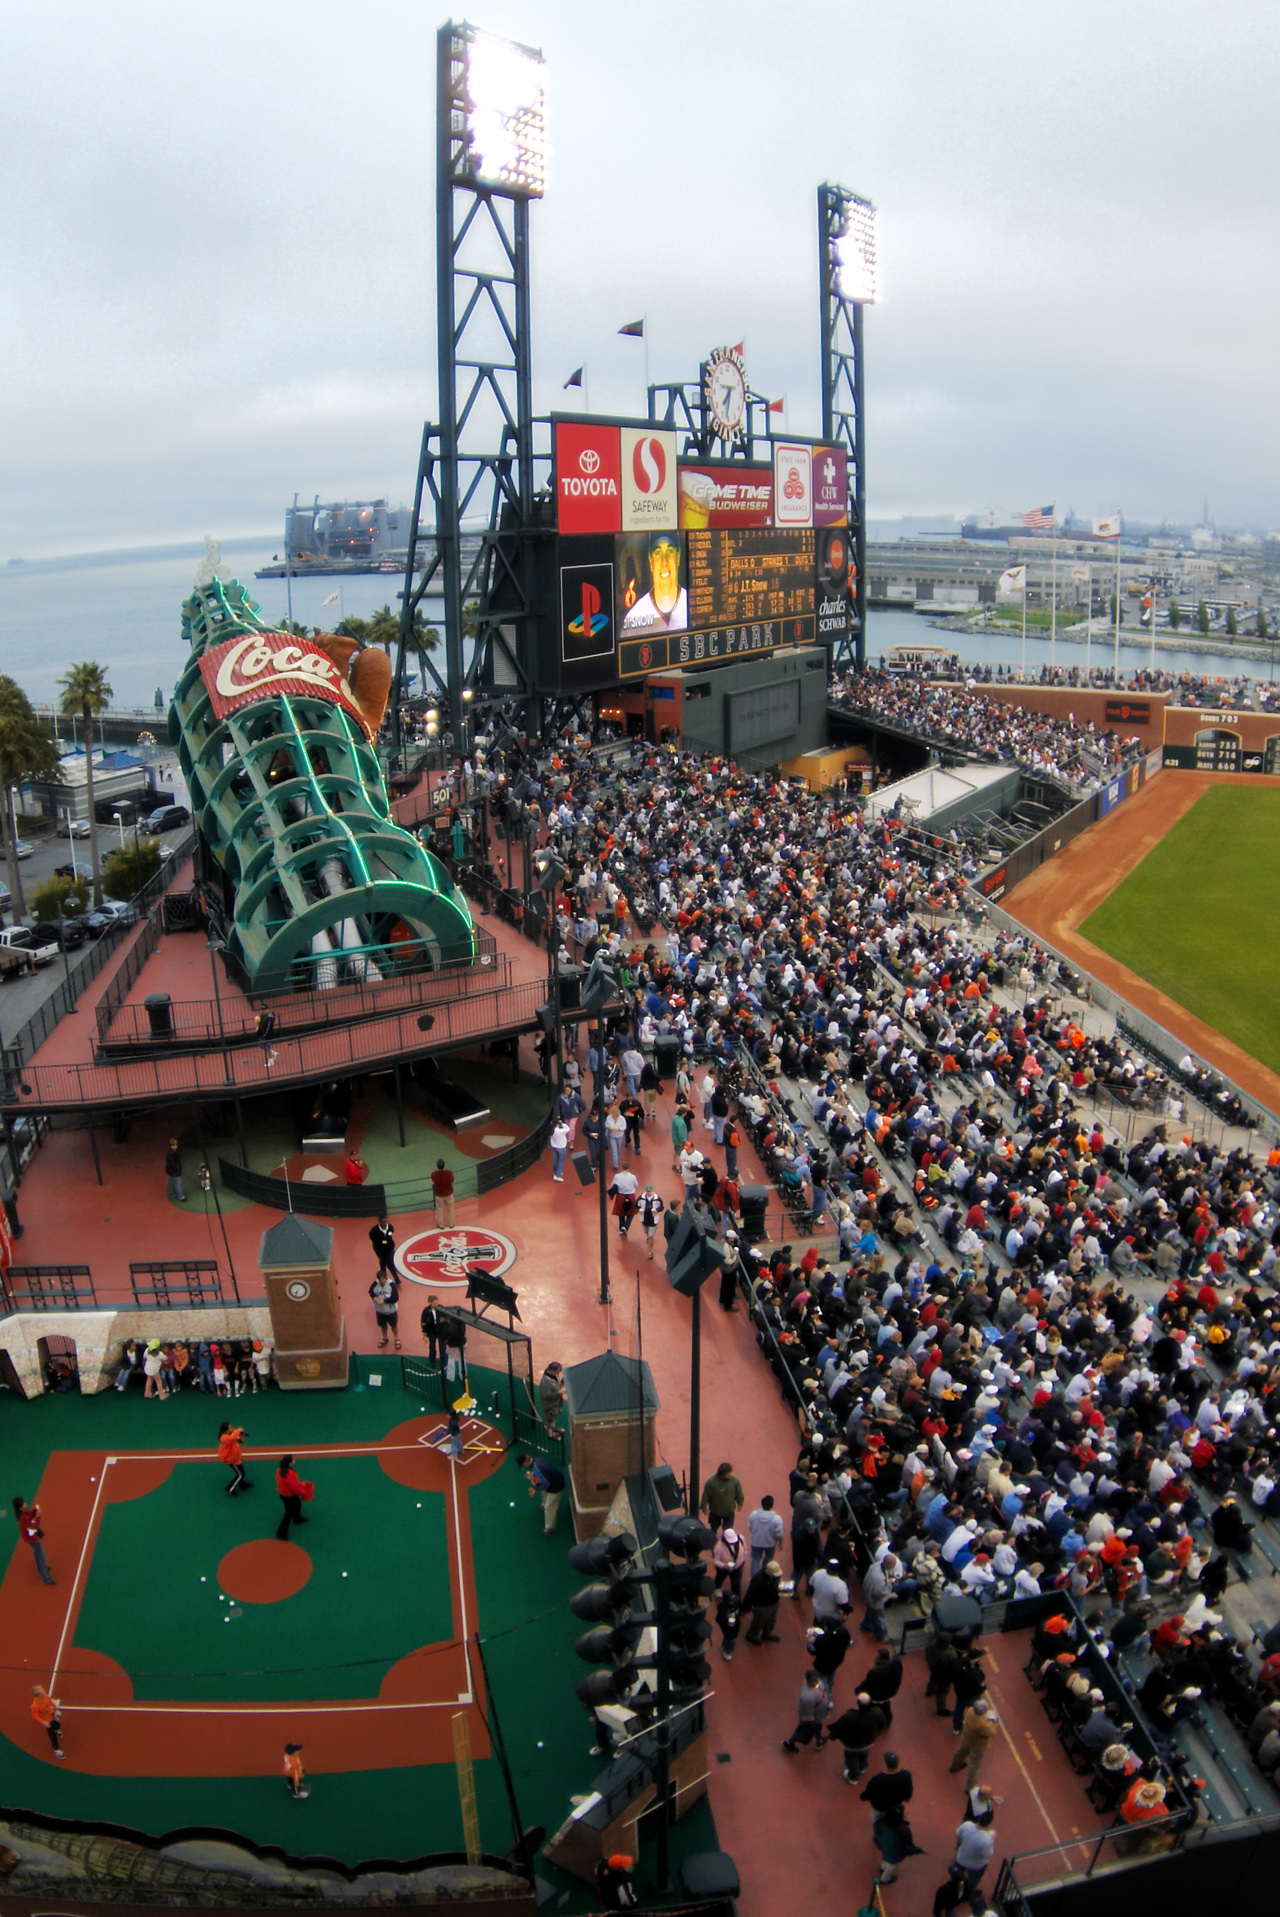 AT&T Park is one of the very best things to do in San Francisco